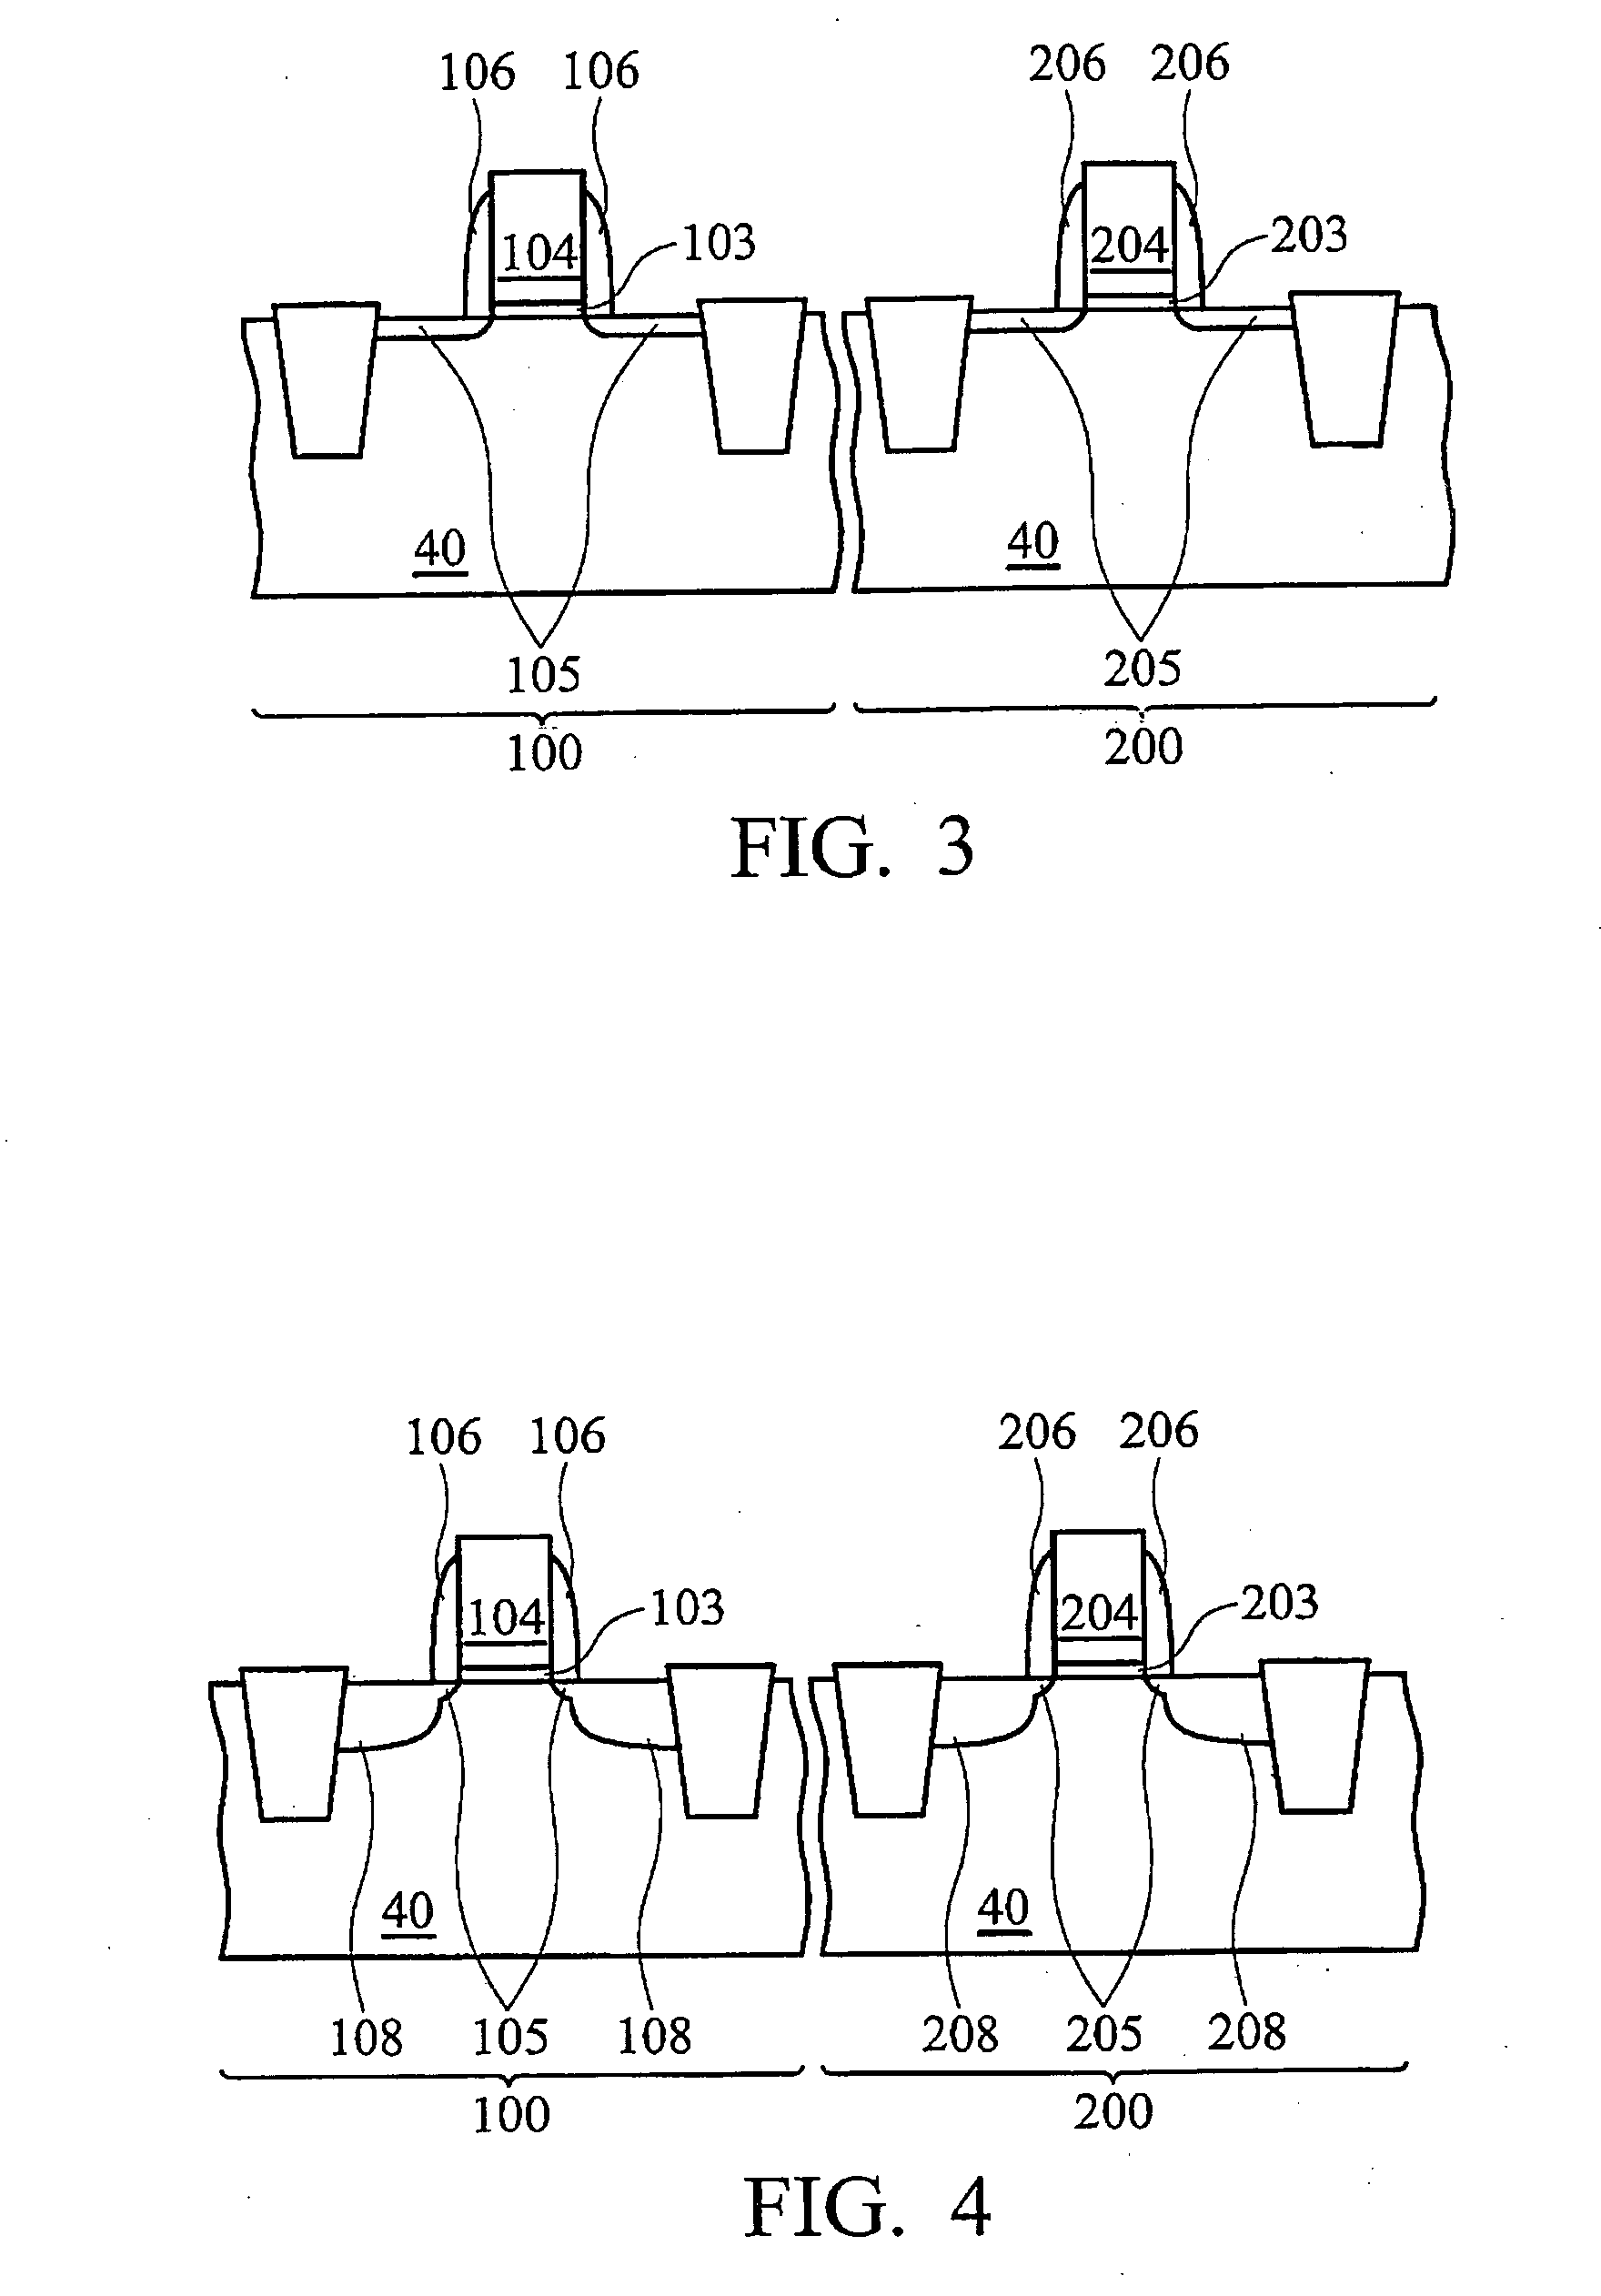 Method of forming a MOS device having a strained channel region